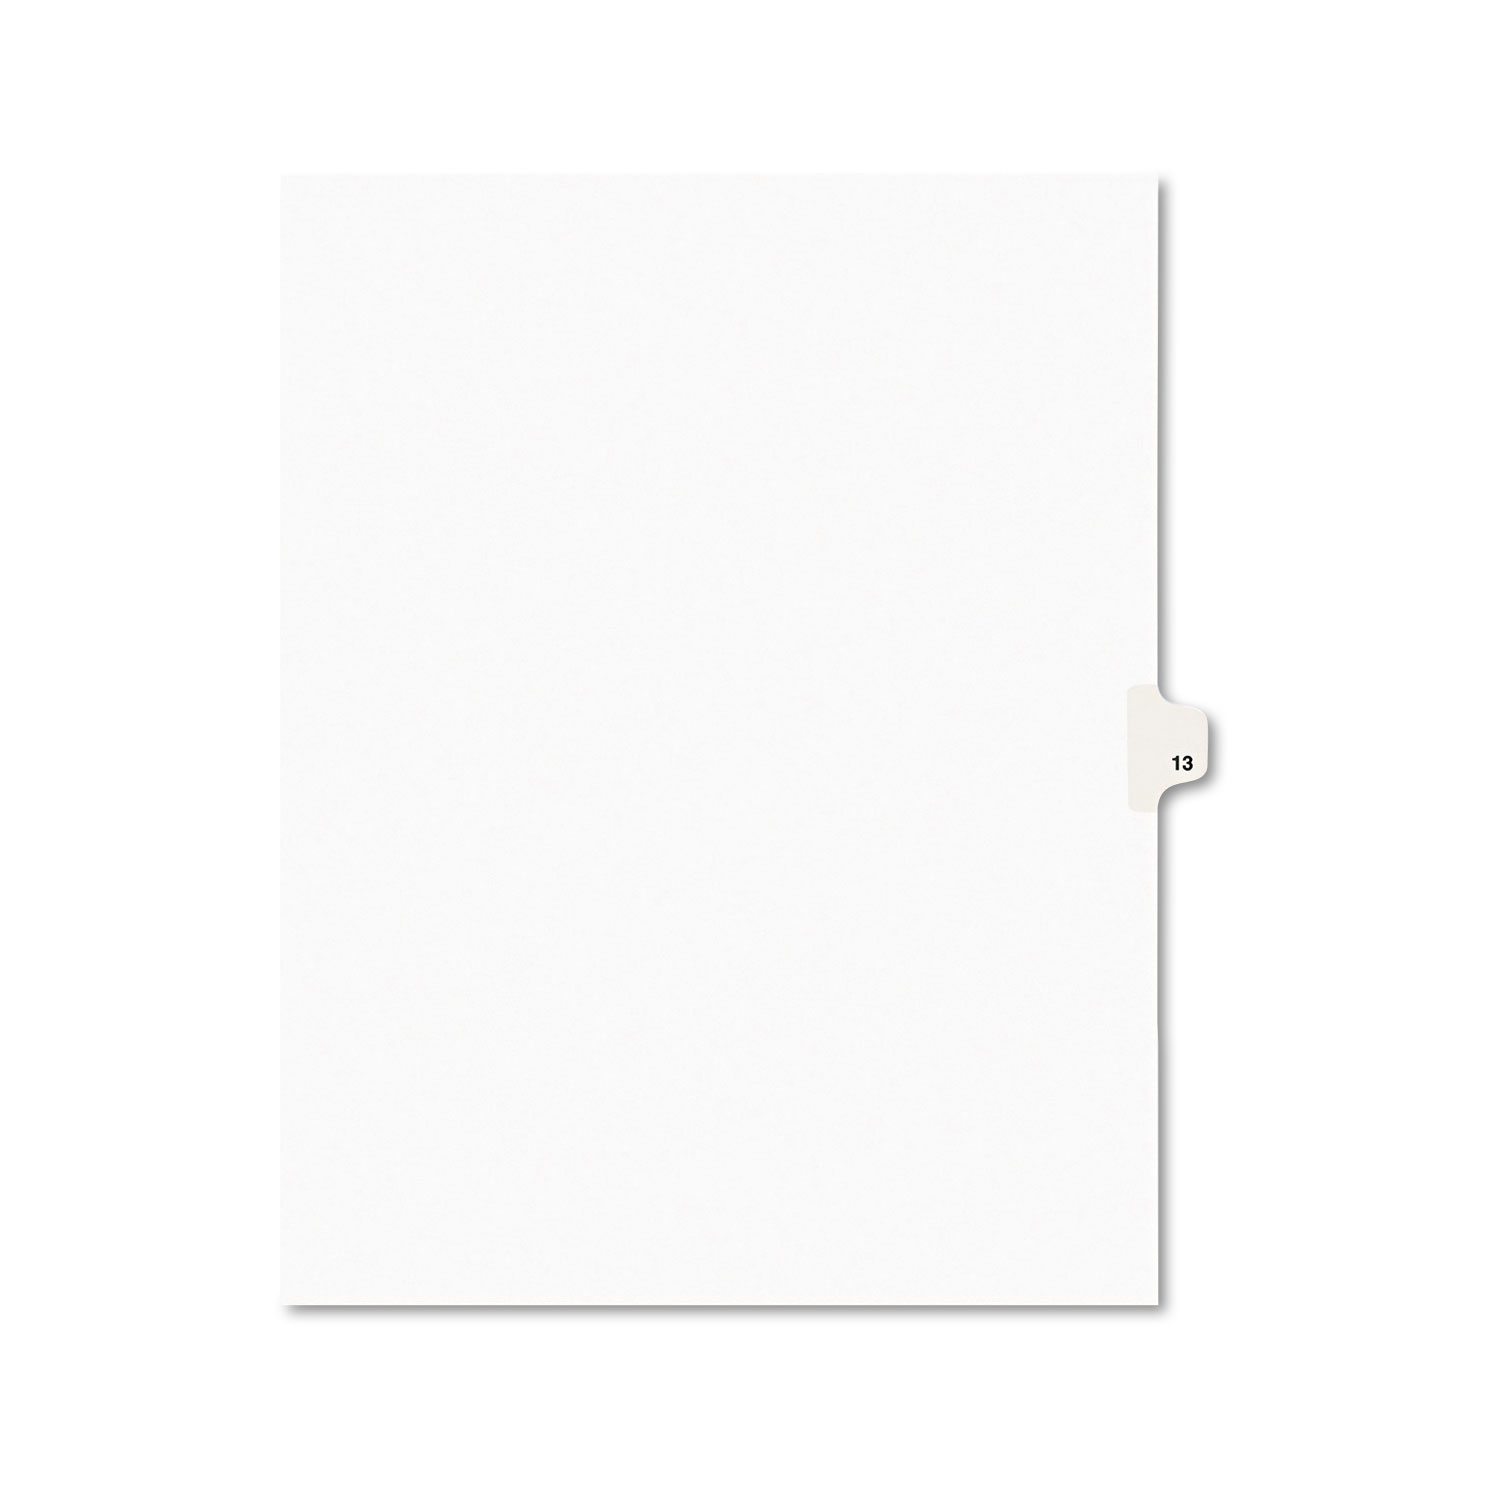  Avery 11923 Preprinted Legal Exhibit Side Tab Index Dividers, Avery Style, 10-Tab, 13, 11 x 8.5, White, 25/Pack (AVE11923) 